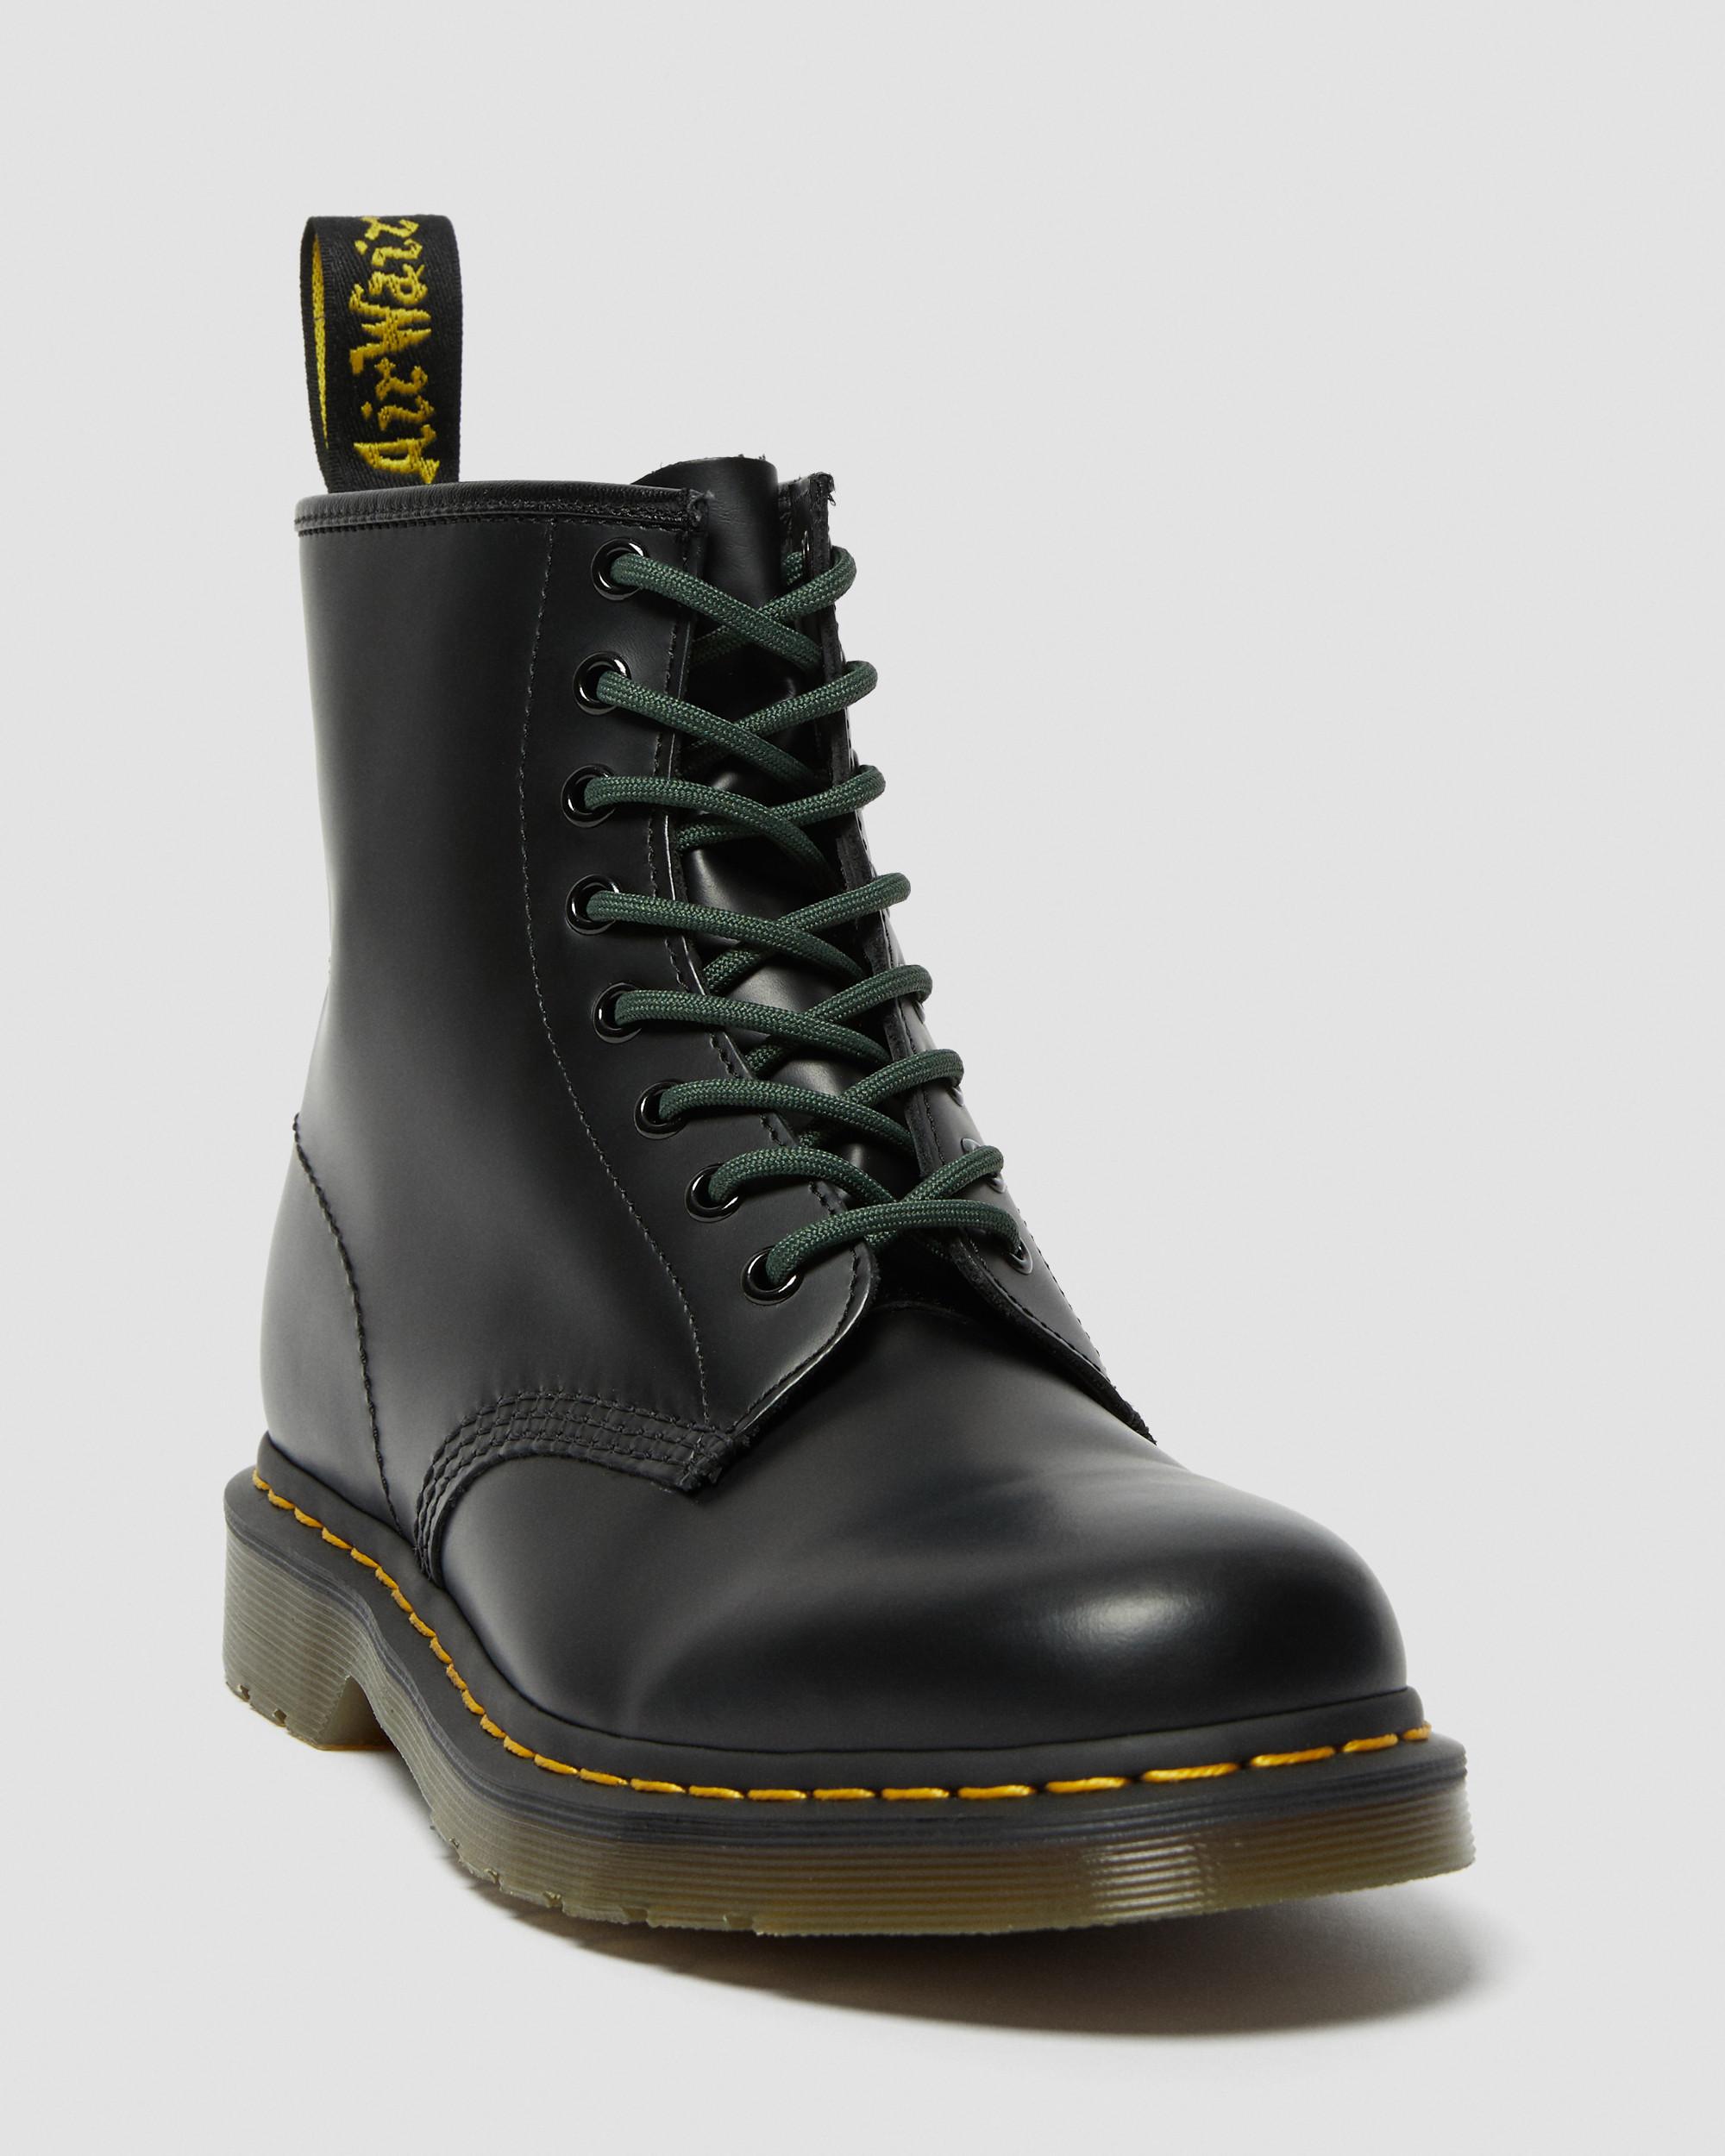 Like new Dr. Marten's boots 11